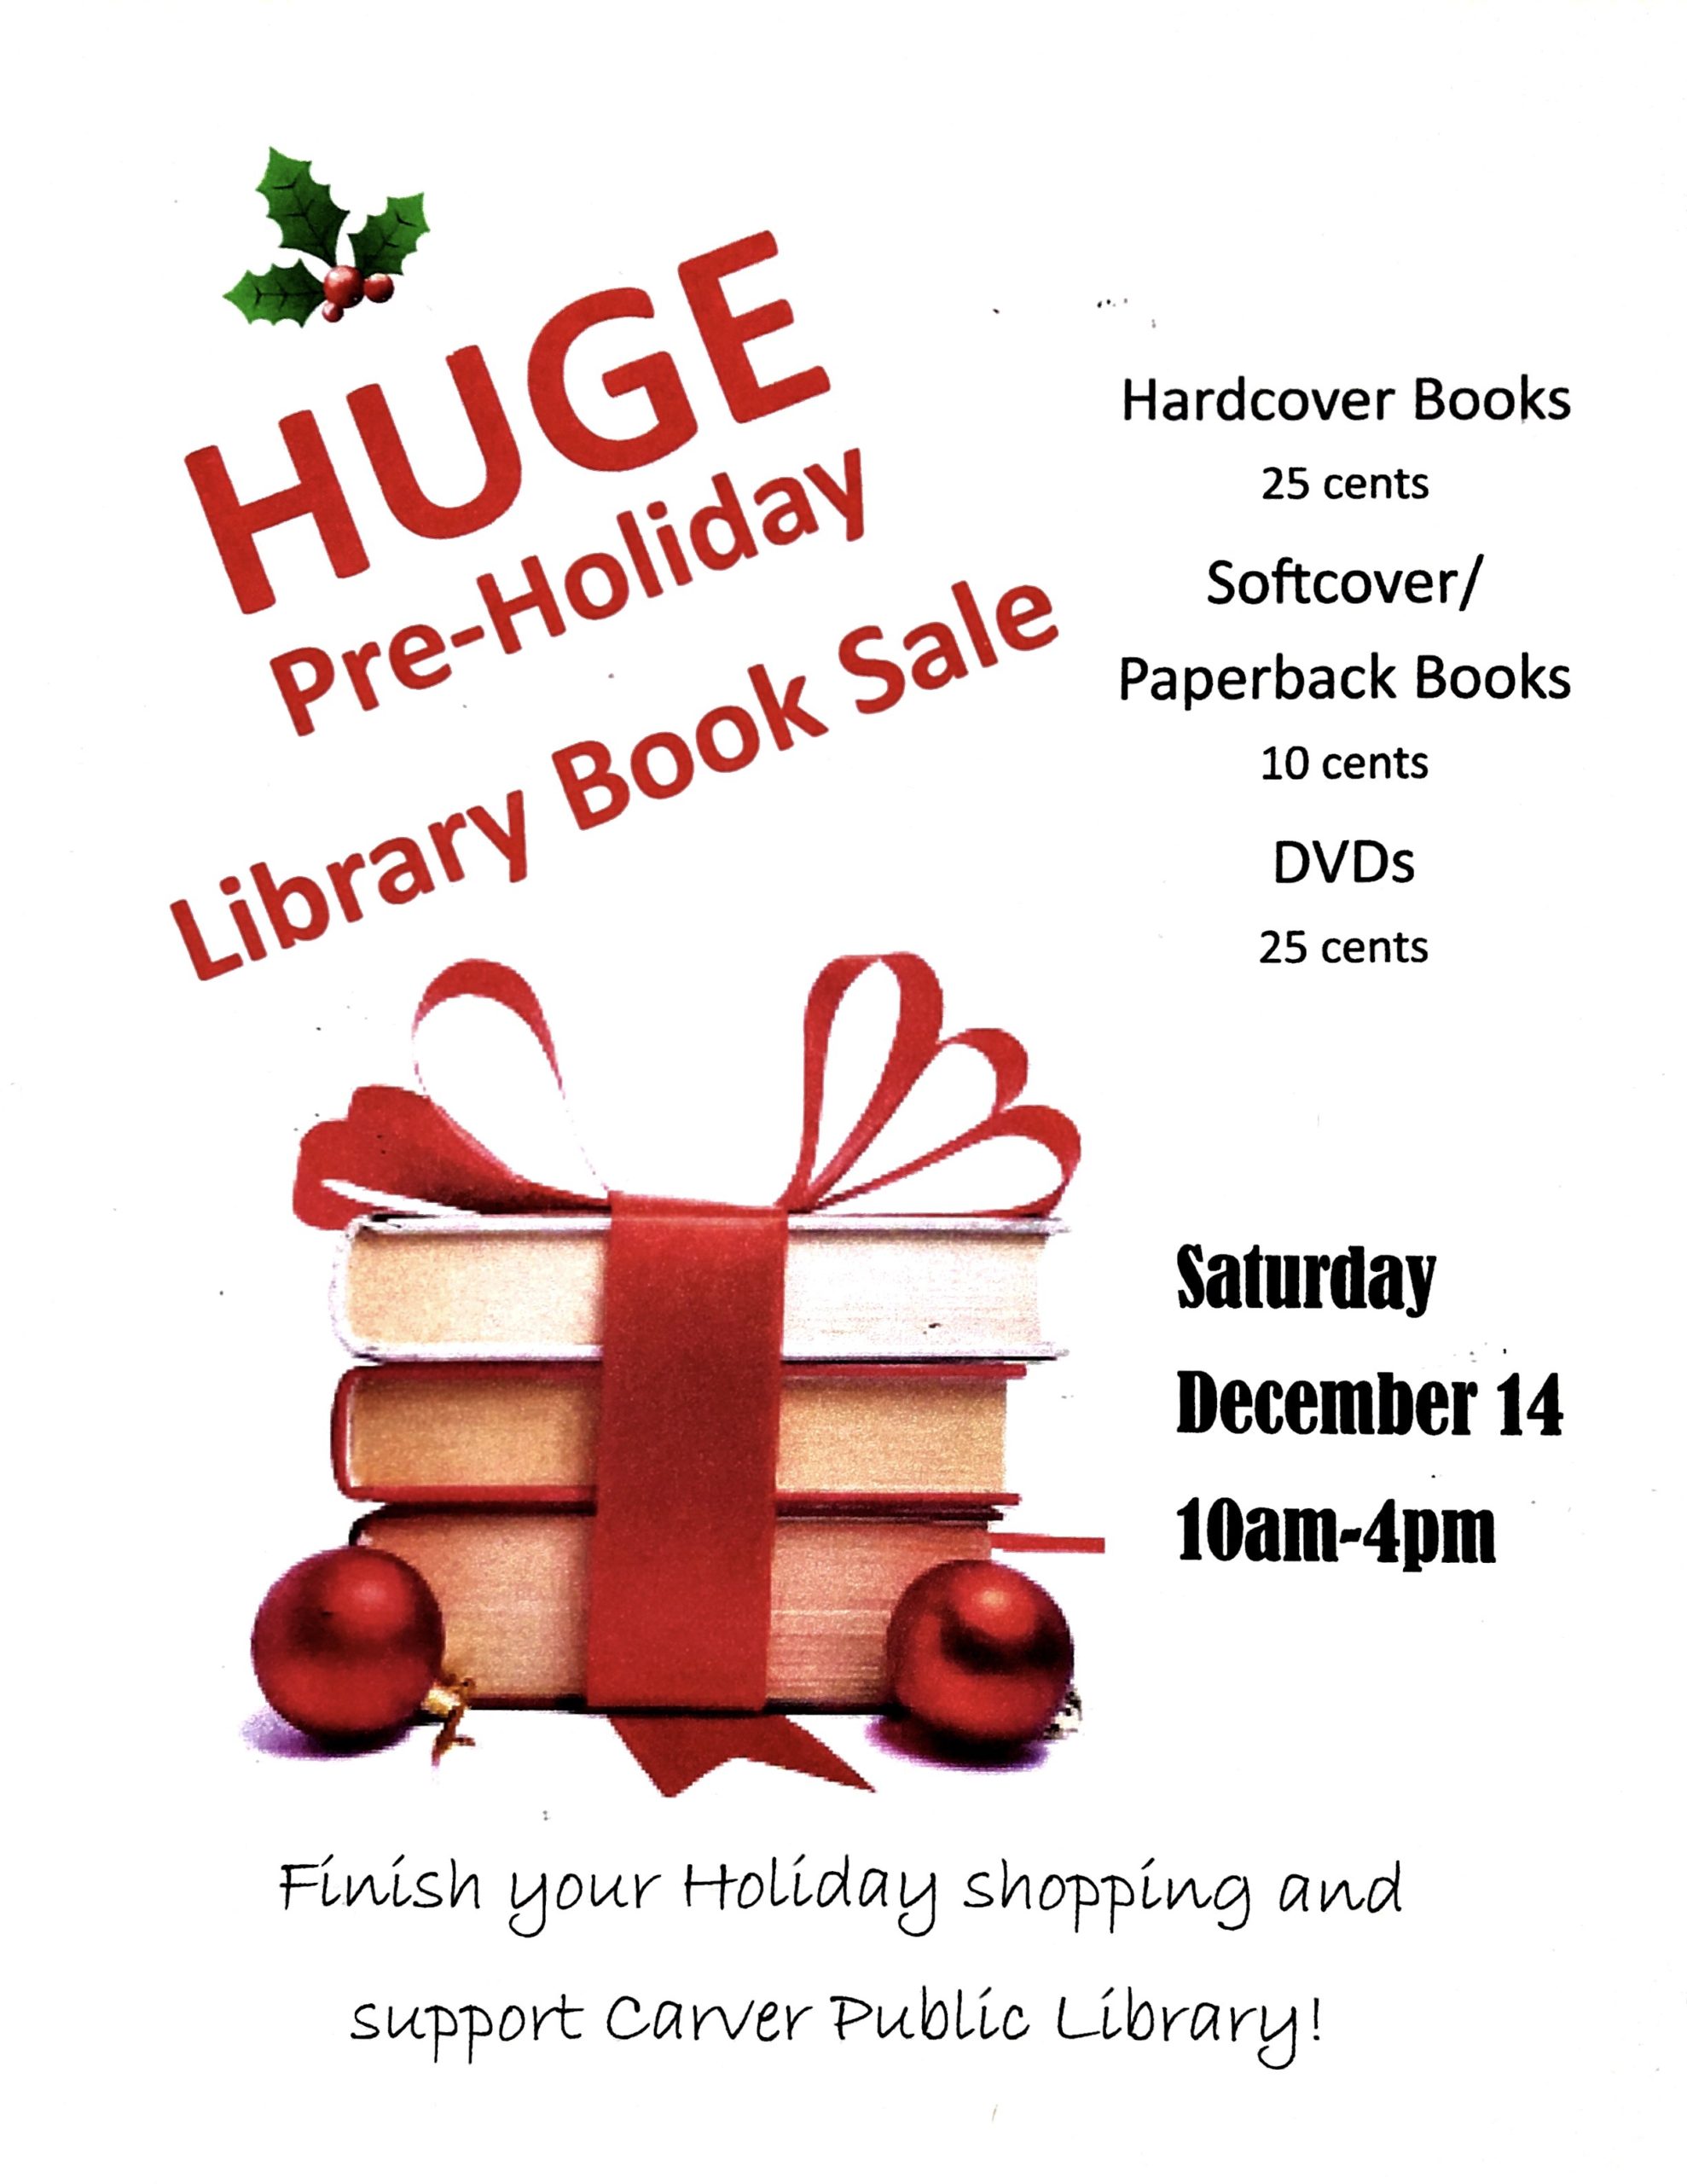 HOLIDAY BOOK SALE